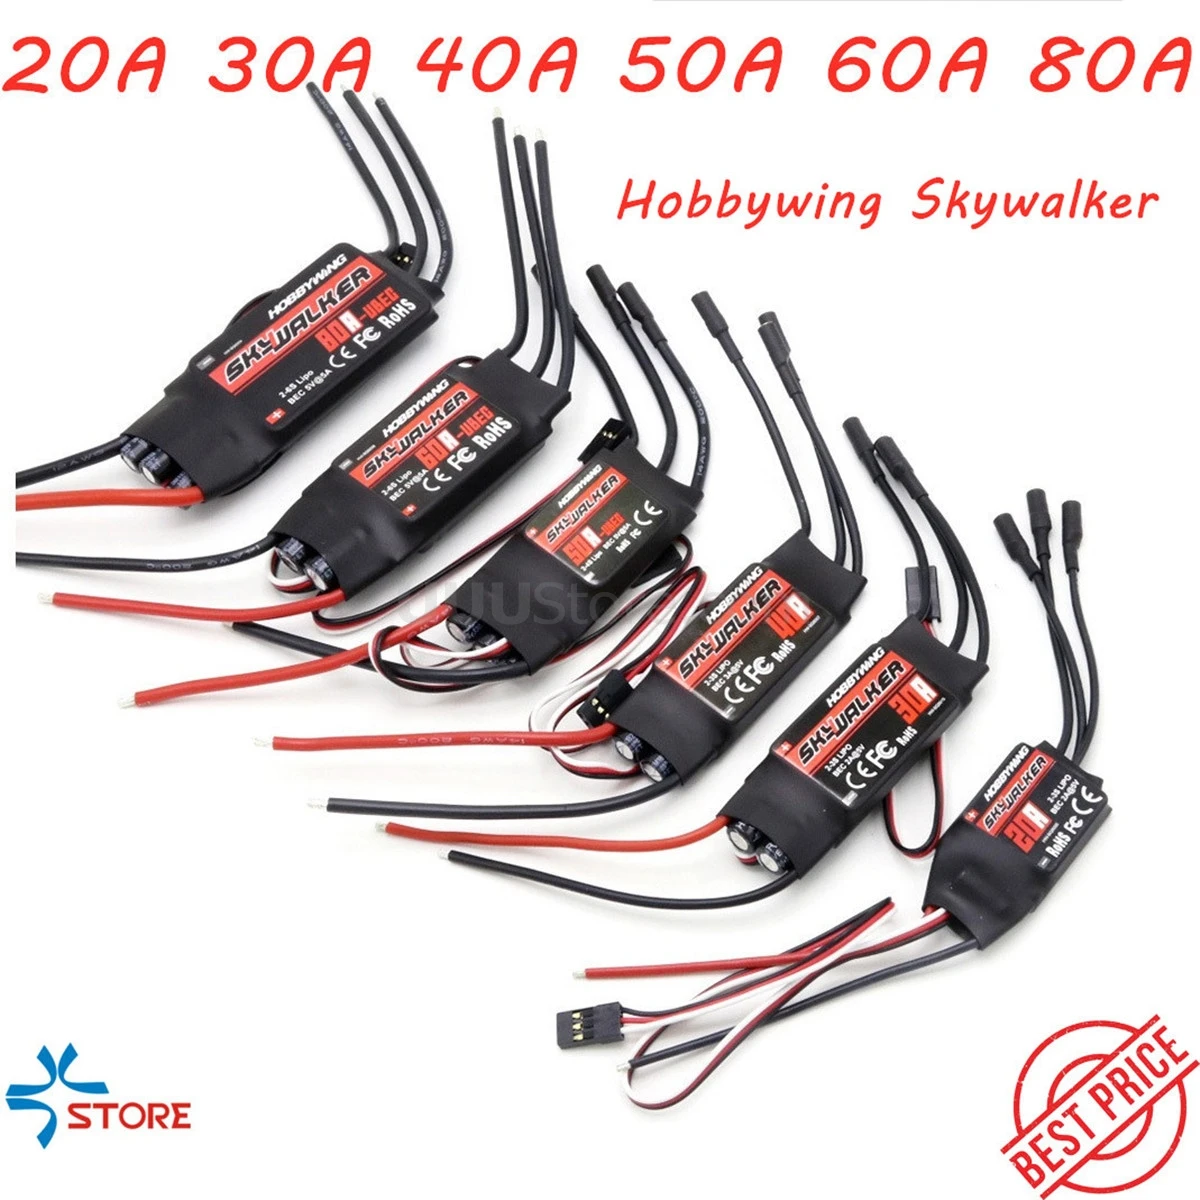 

Hobbywing SkyWalker 15A 20A 30A 40A 50A 60A 80A ESC Brushless Speed Controller With BEC For FPV RC Quadcopter Skywalker Airplane